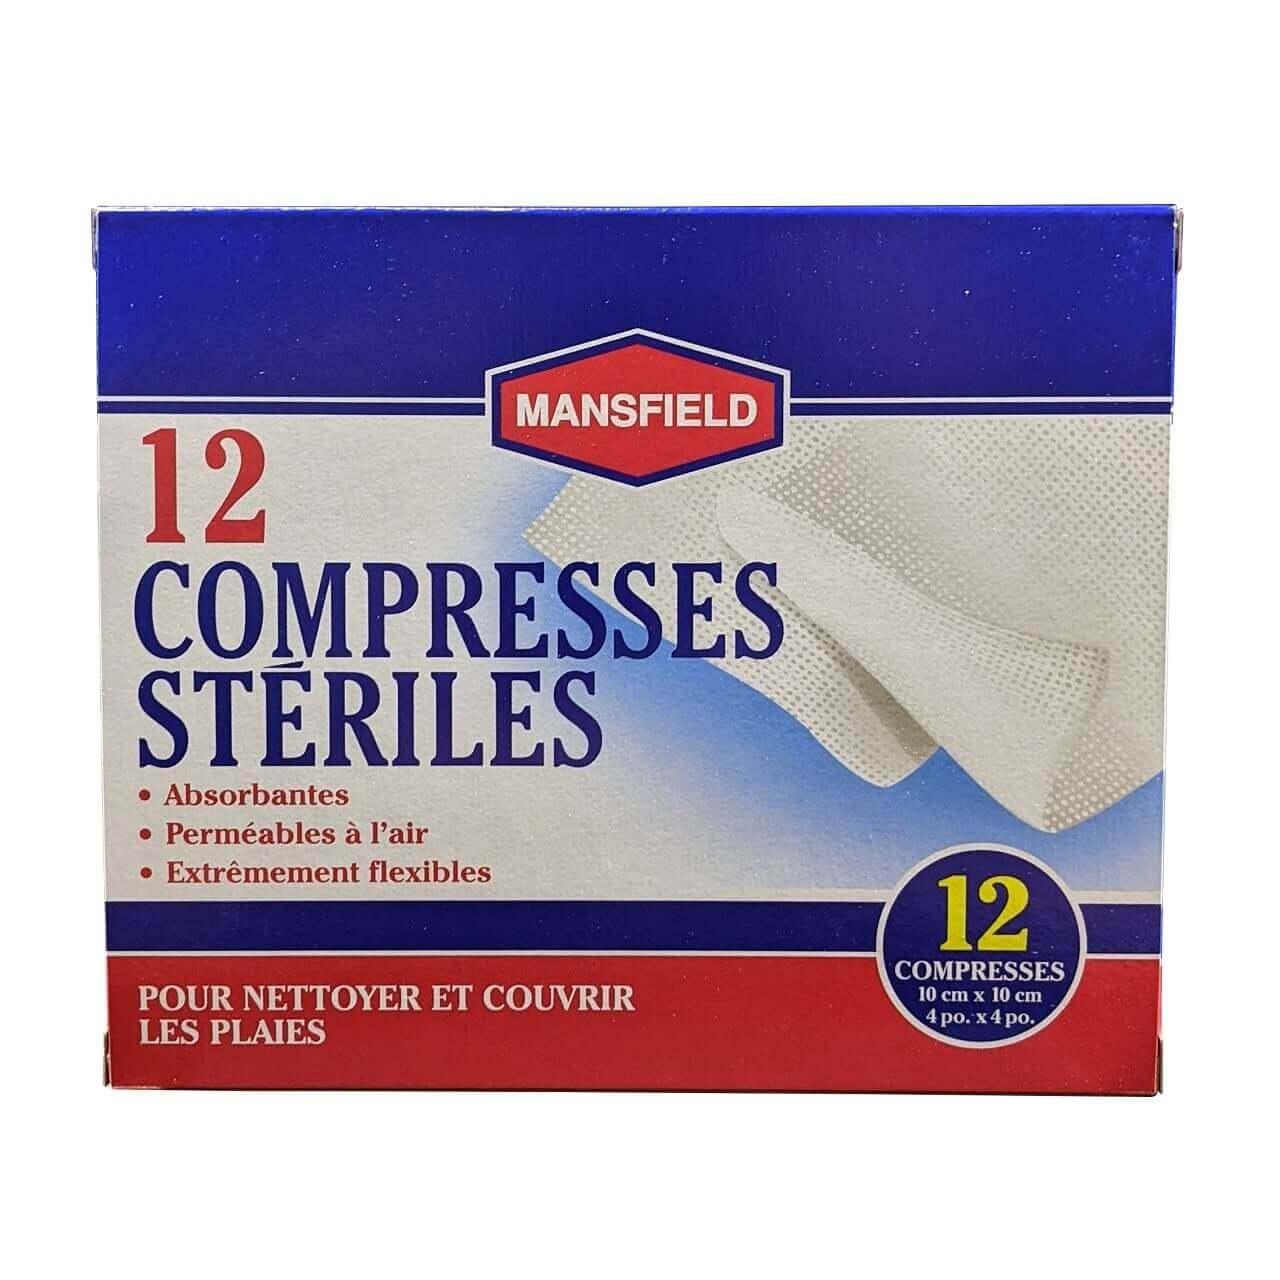 Product label for Mansfield First Aid Sterile Pads (10 cm x 10 cm) (12 pads) in French